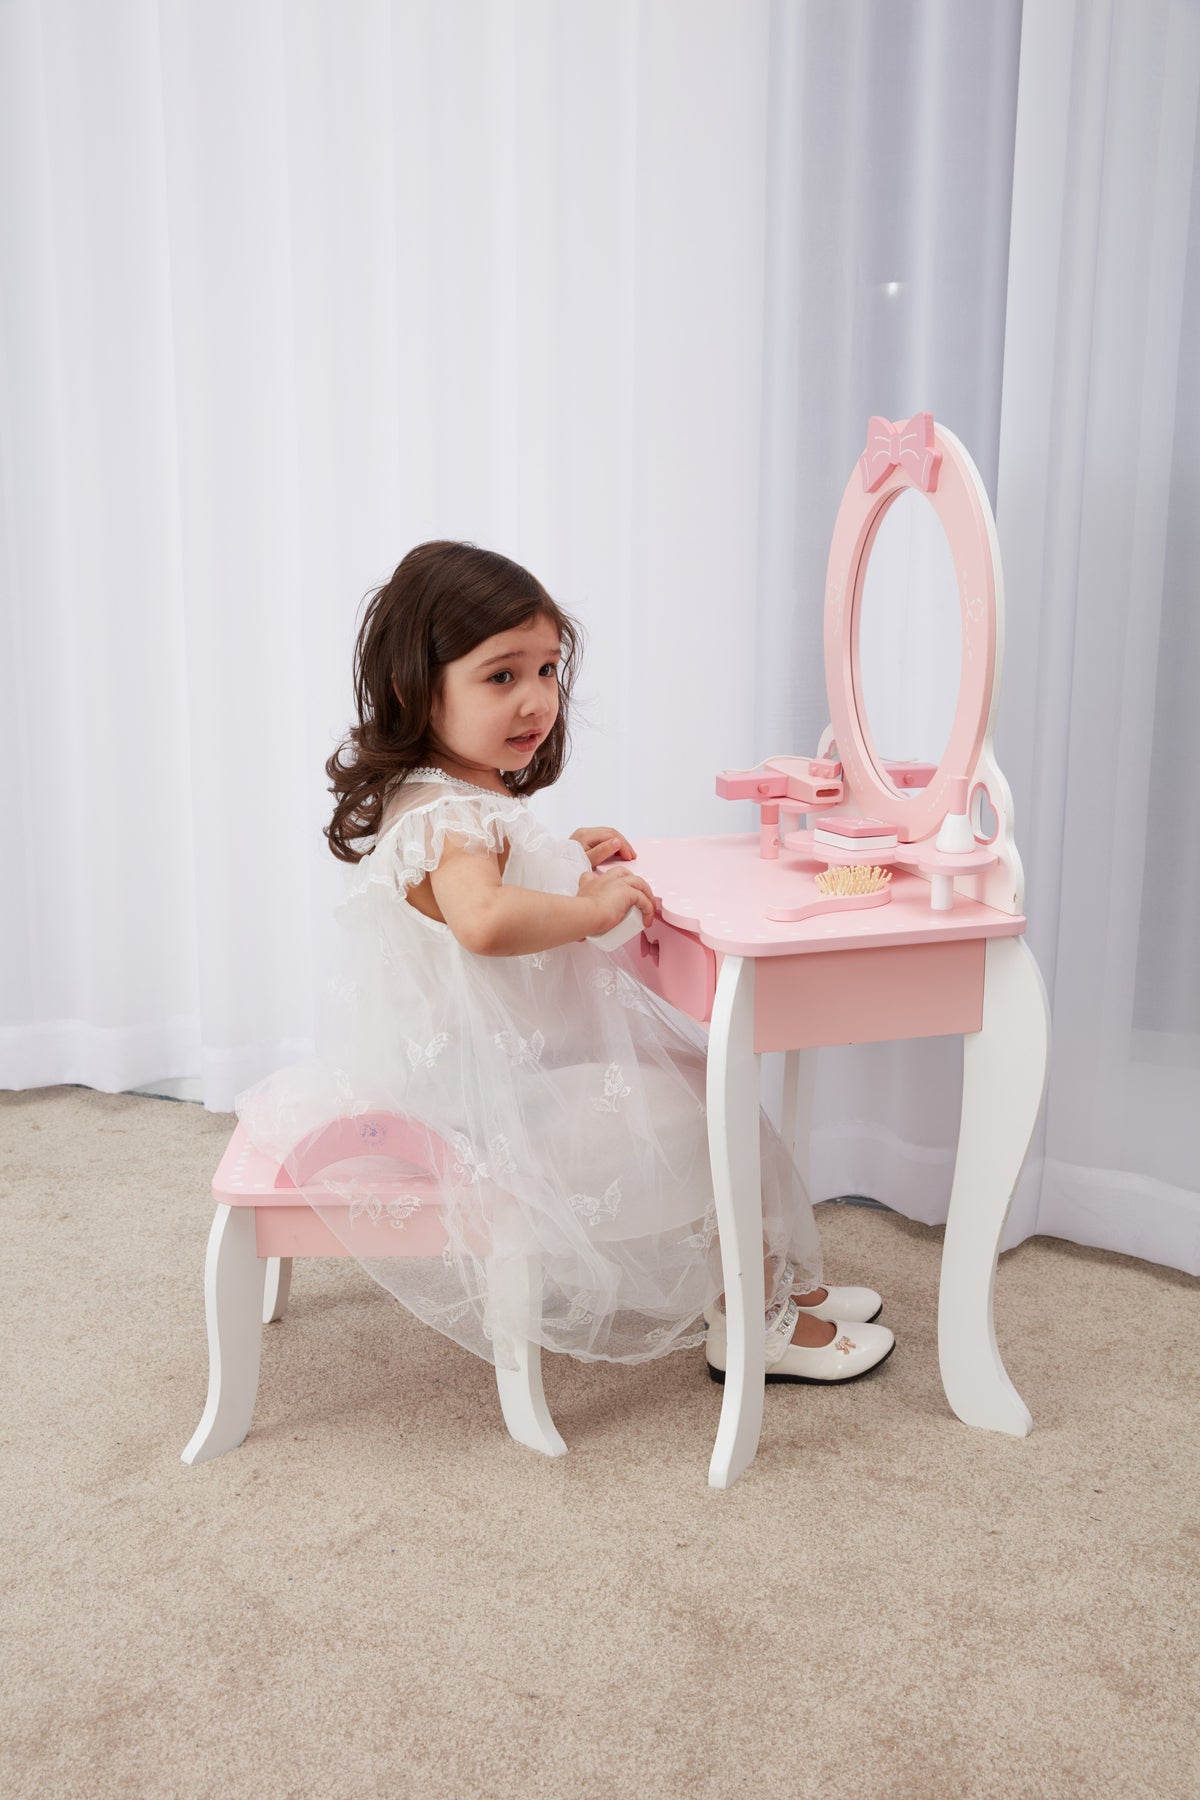 FN - Wooden Simulation Furniture (Princess Dressing Table) product image model